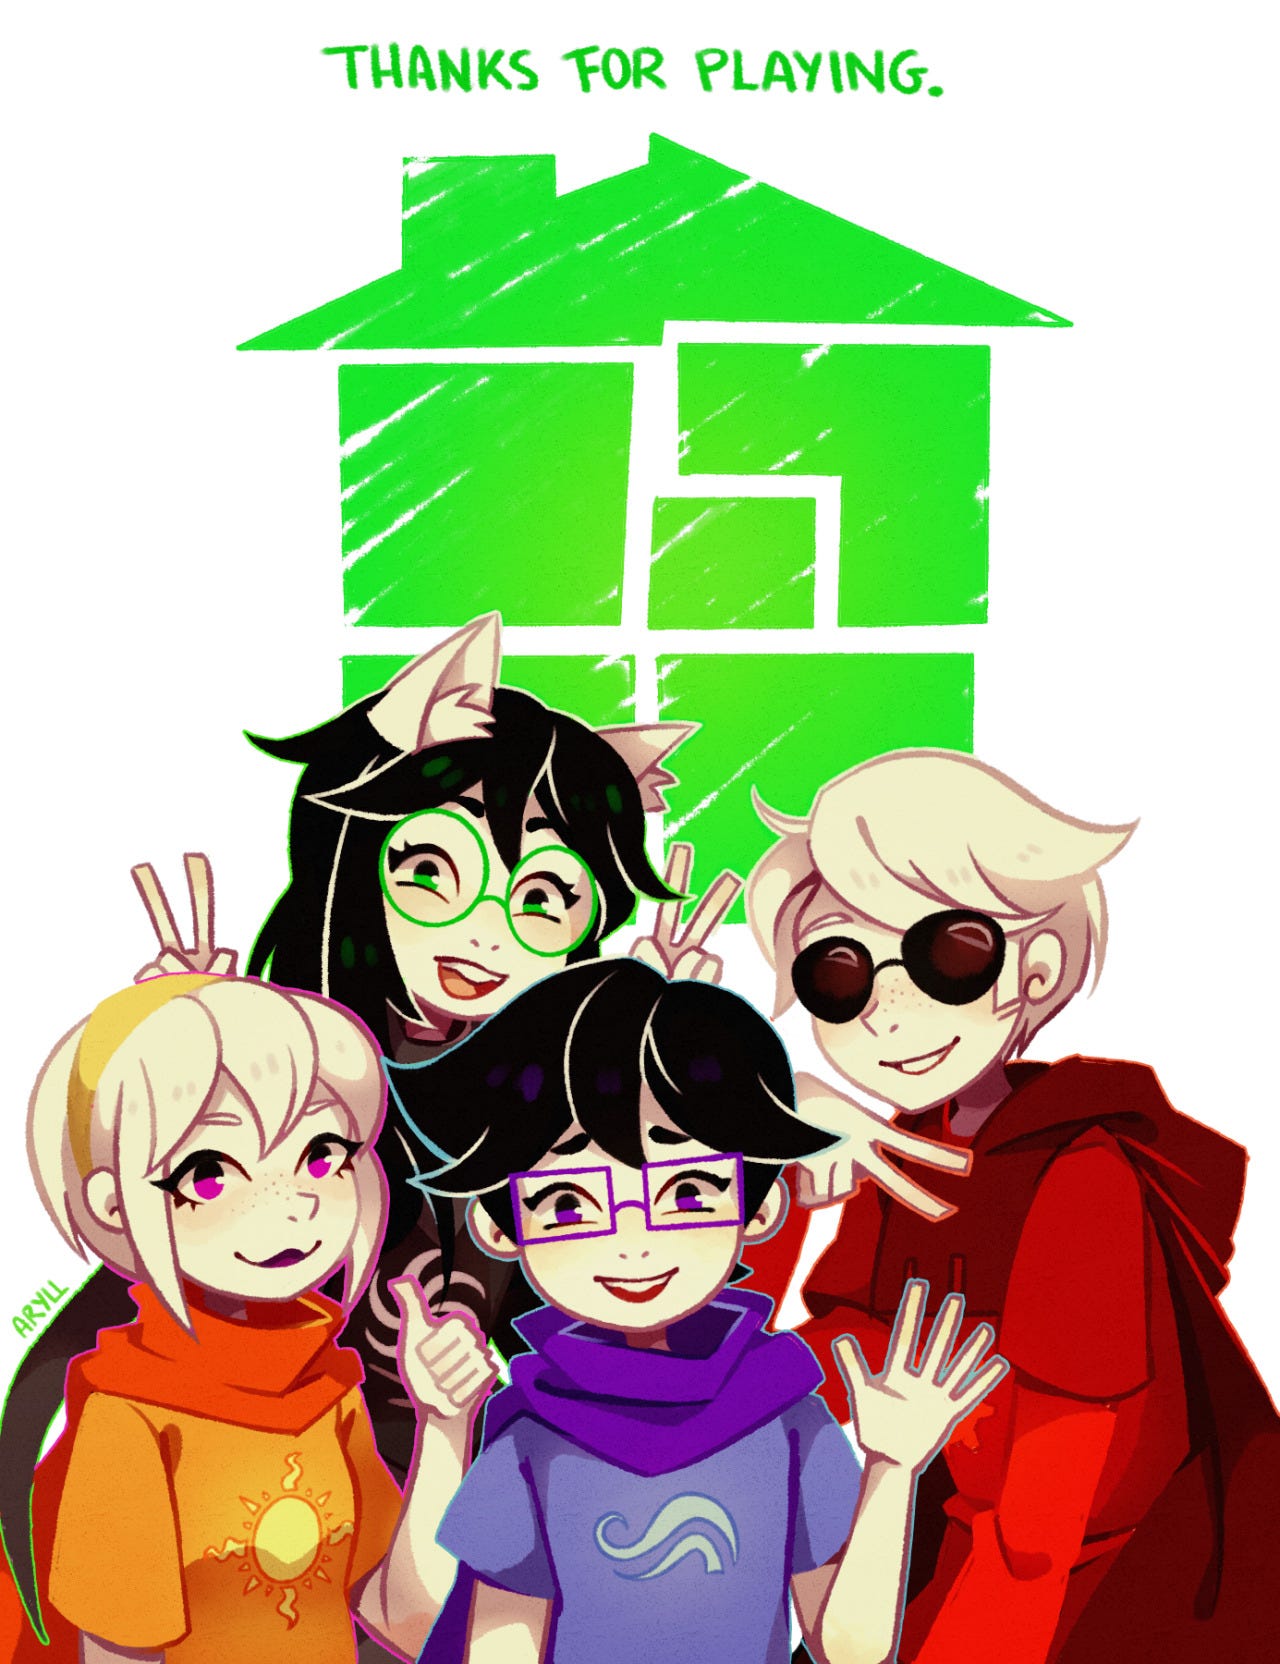 Fan illustration that says: "Thanks for playing" with the Homestuck green house logo and the four Homestucks kids waving goodbye